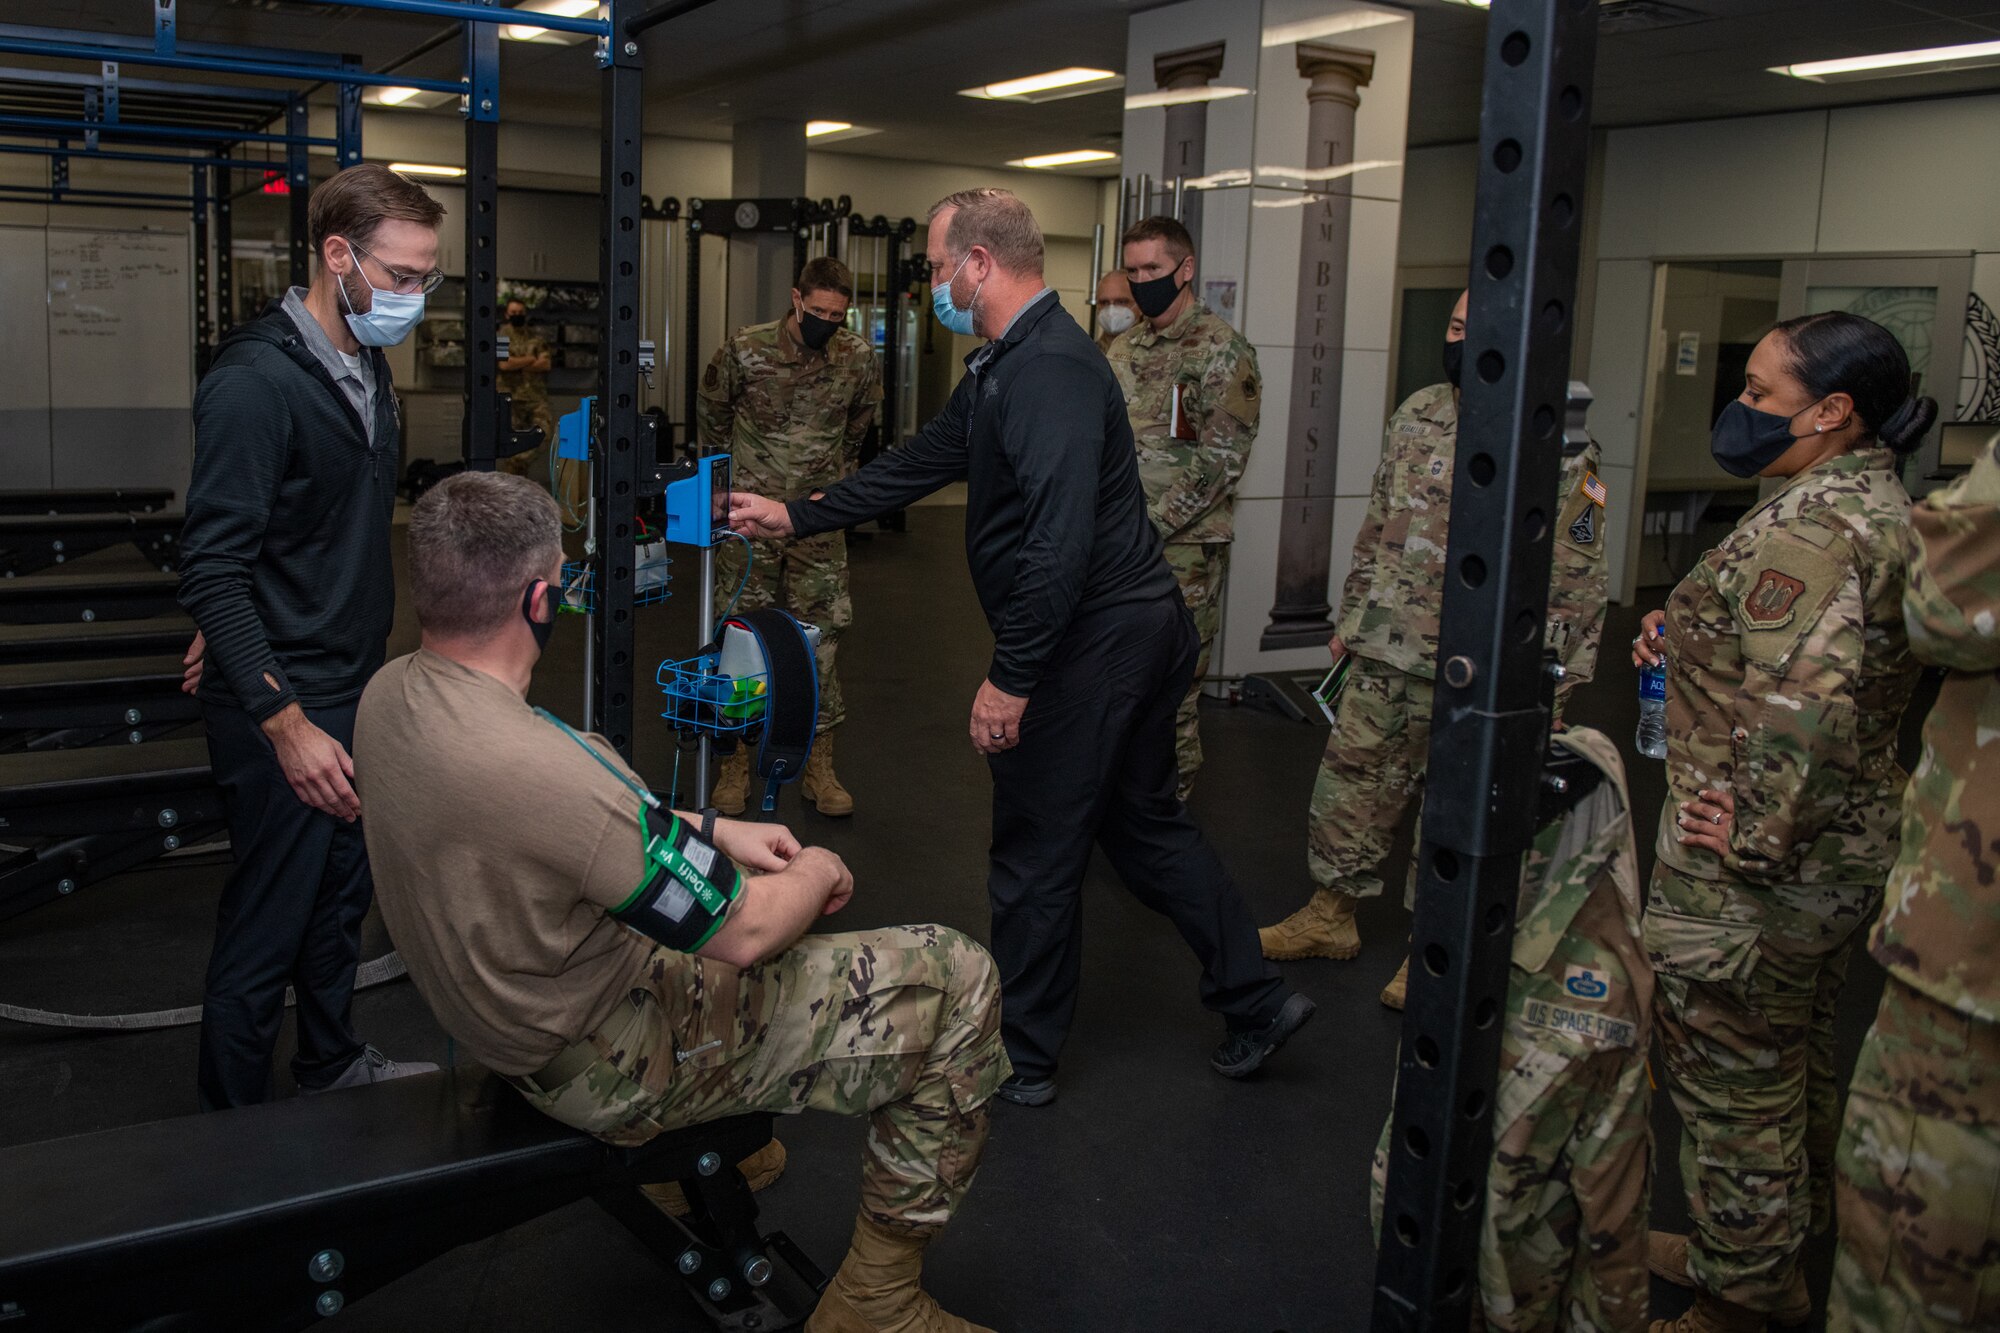 Joe Kirkman (center), Special Warfare Training Wing, physical therapist, briefs the SWTW training process and equipment during the STARCOM Senior Leadership Visit, Feb. 16, 2022, Joint Base San Antonio-Chapman Annex, Texas. The STARCOM senior leaders learned how the SWTW combines research, technology integration, strength and conditioning, performance nutrition, physical and occupational therapy, and psychology into the Air Force Special Warfare training pipeline. (U.S. Air Force photo by Thomas Coney).